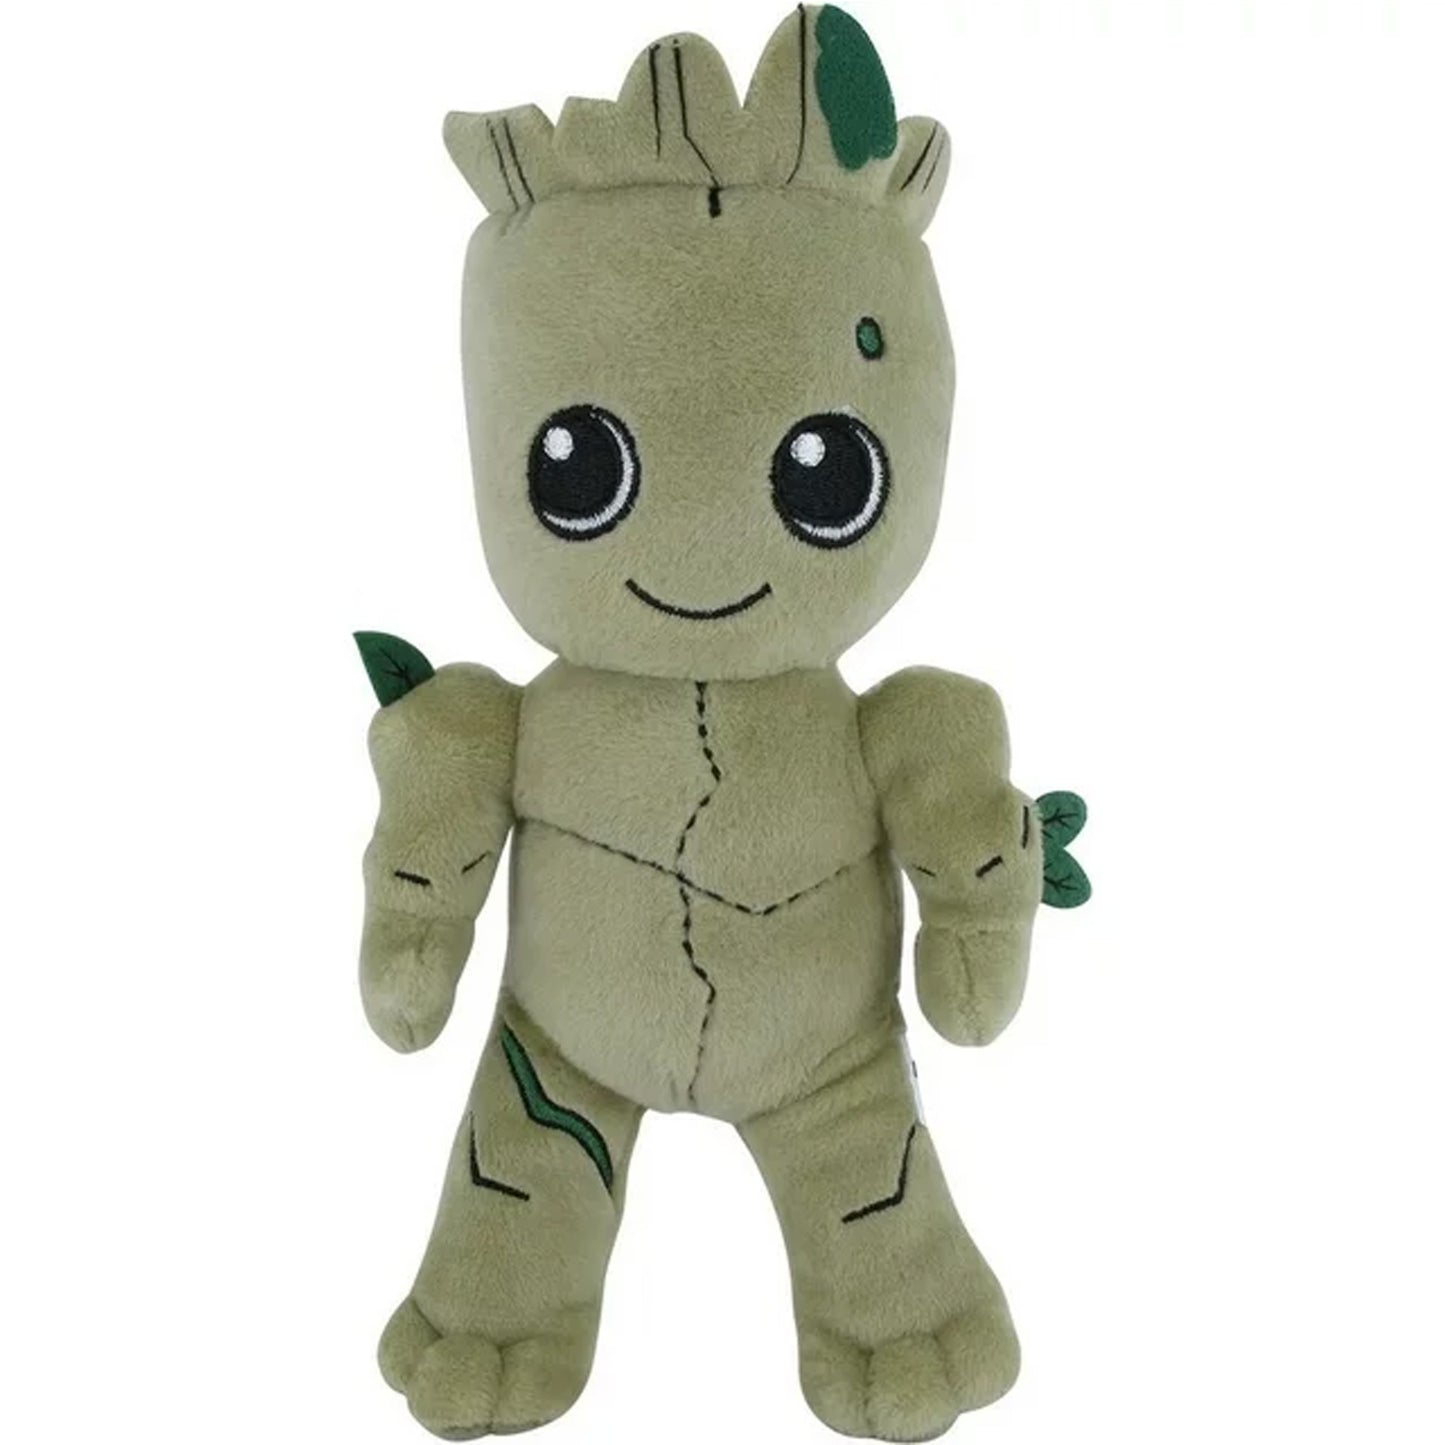 Baby Groot 8" Guardians of the Galaxy Plush